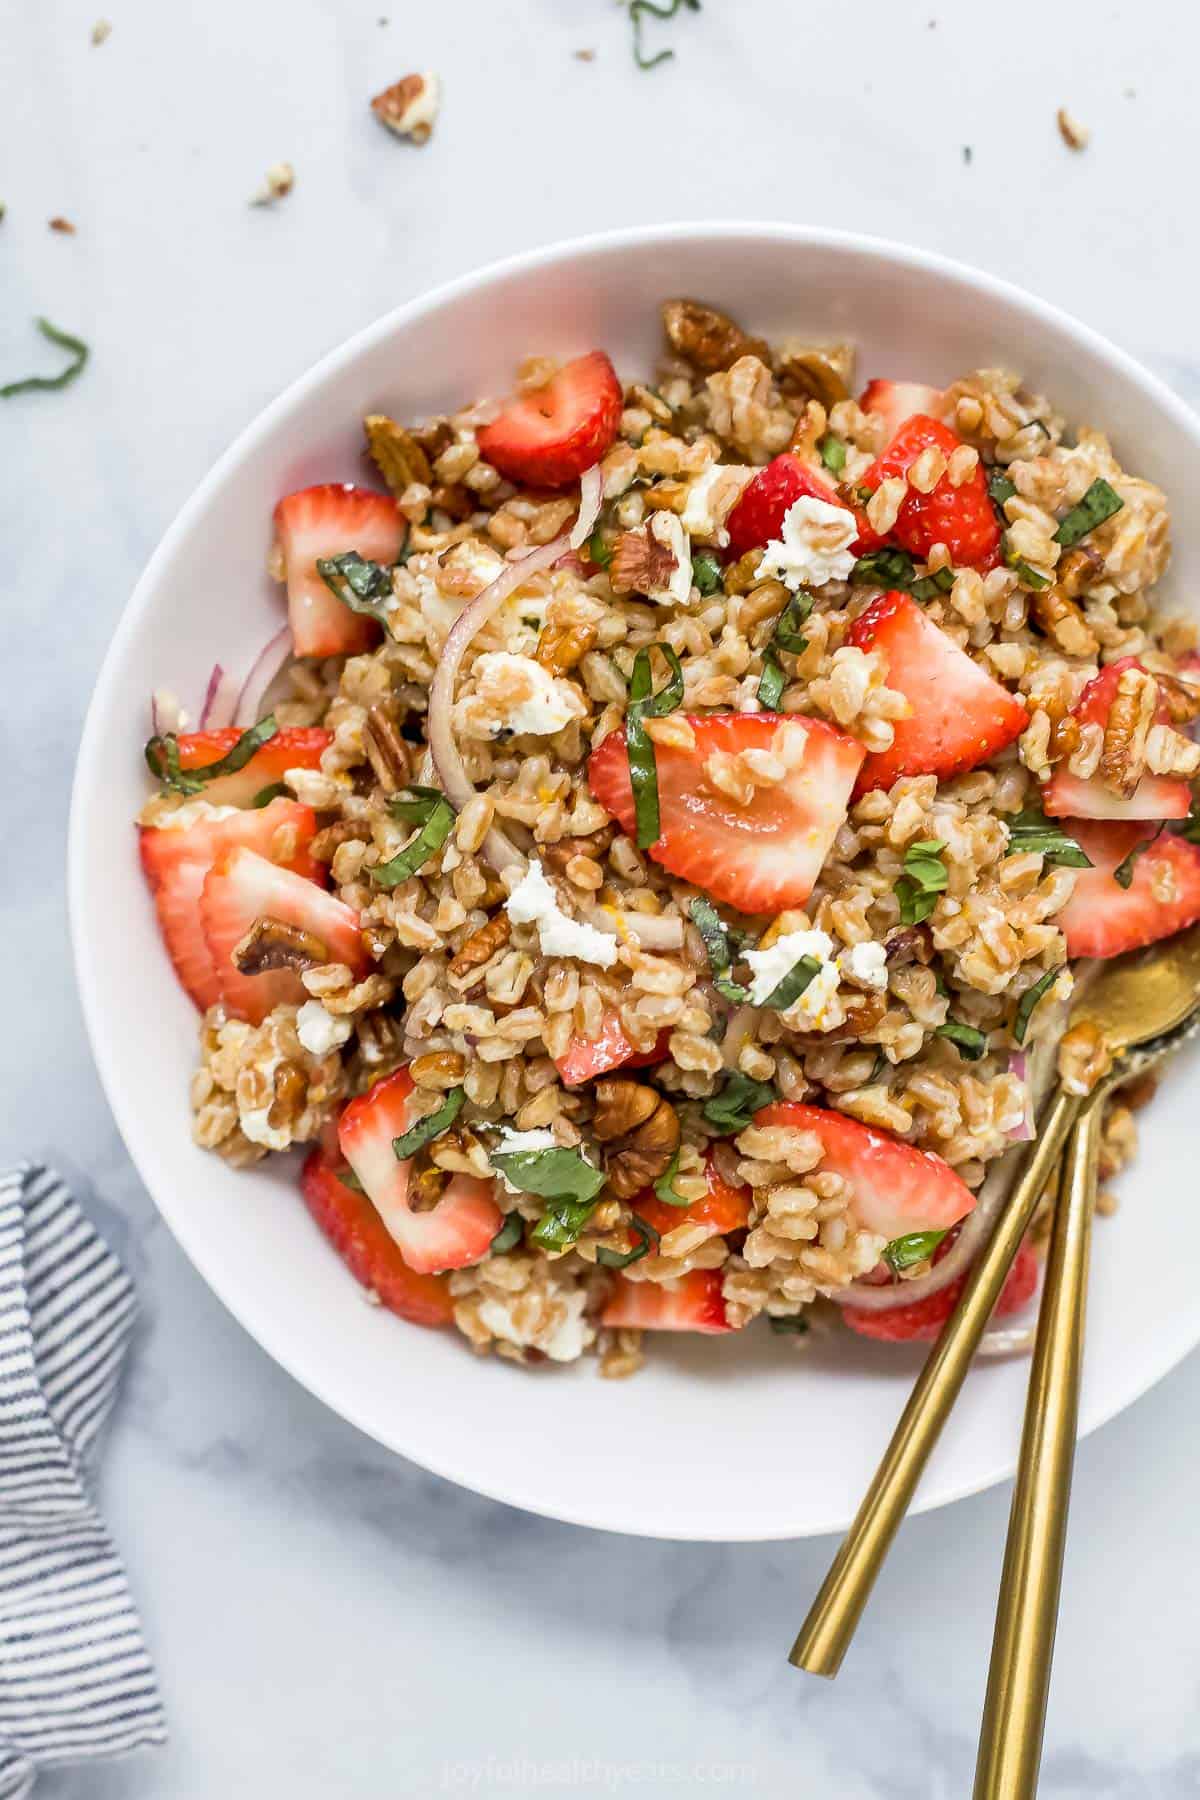 A close-up shot of a bowl of strawberry farro salad on a kitchen countertop